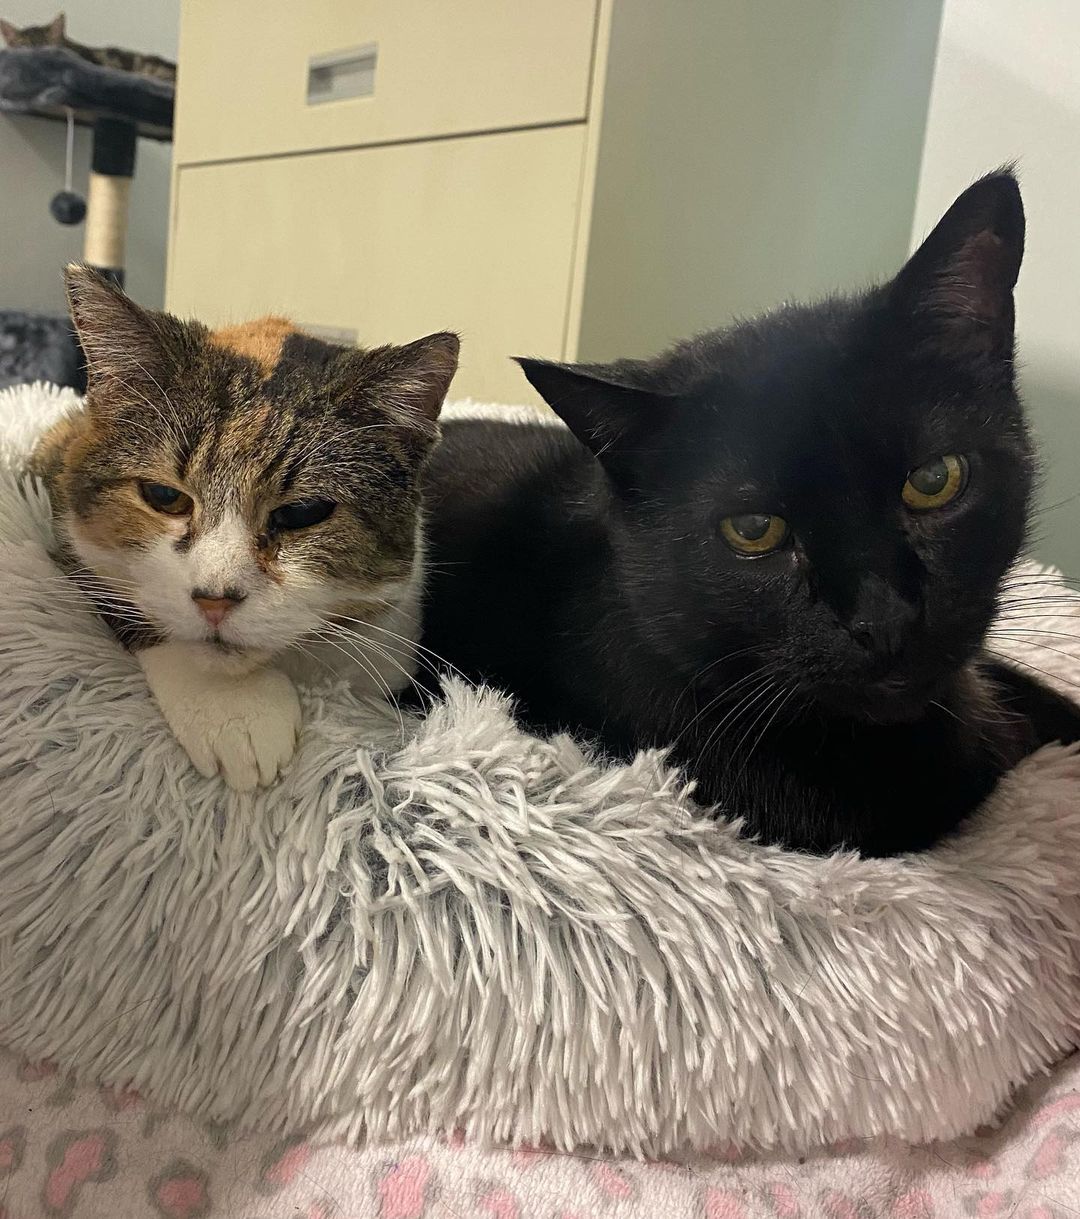 Cold fall nights are the purrfect weather for blossoming new friendships. 14-year-old kitties, Primrose (who battles renal disease and glaucoma) and Jacob (currently in remission from diabetes), have become bedtime buddies ❤️